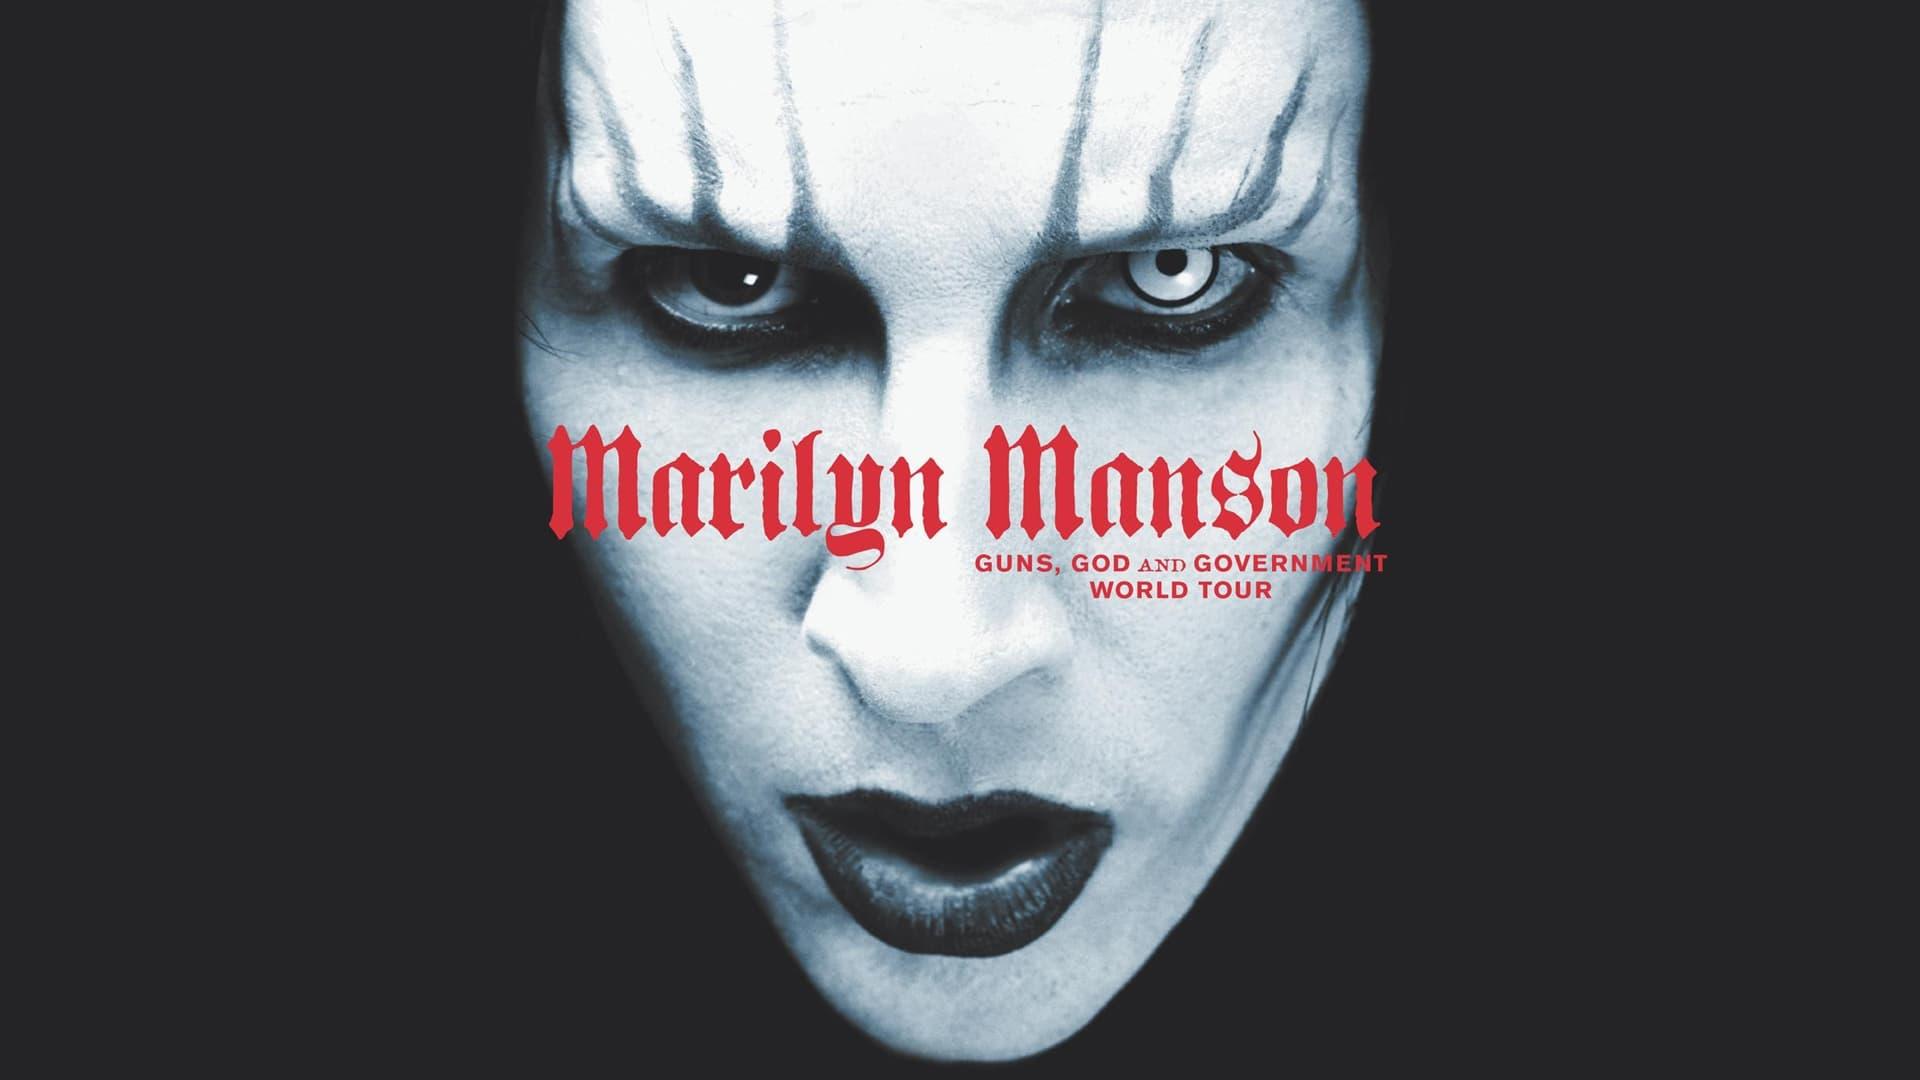 Marilyn Manson - Guns, God and Government World Tour backdrop